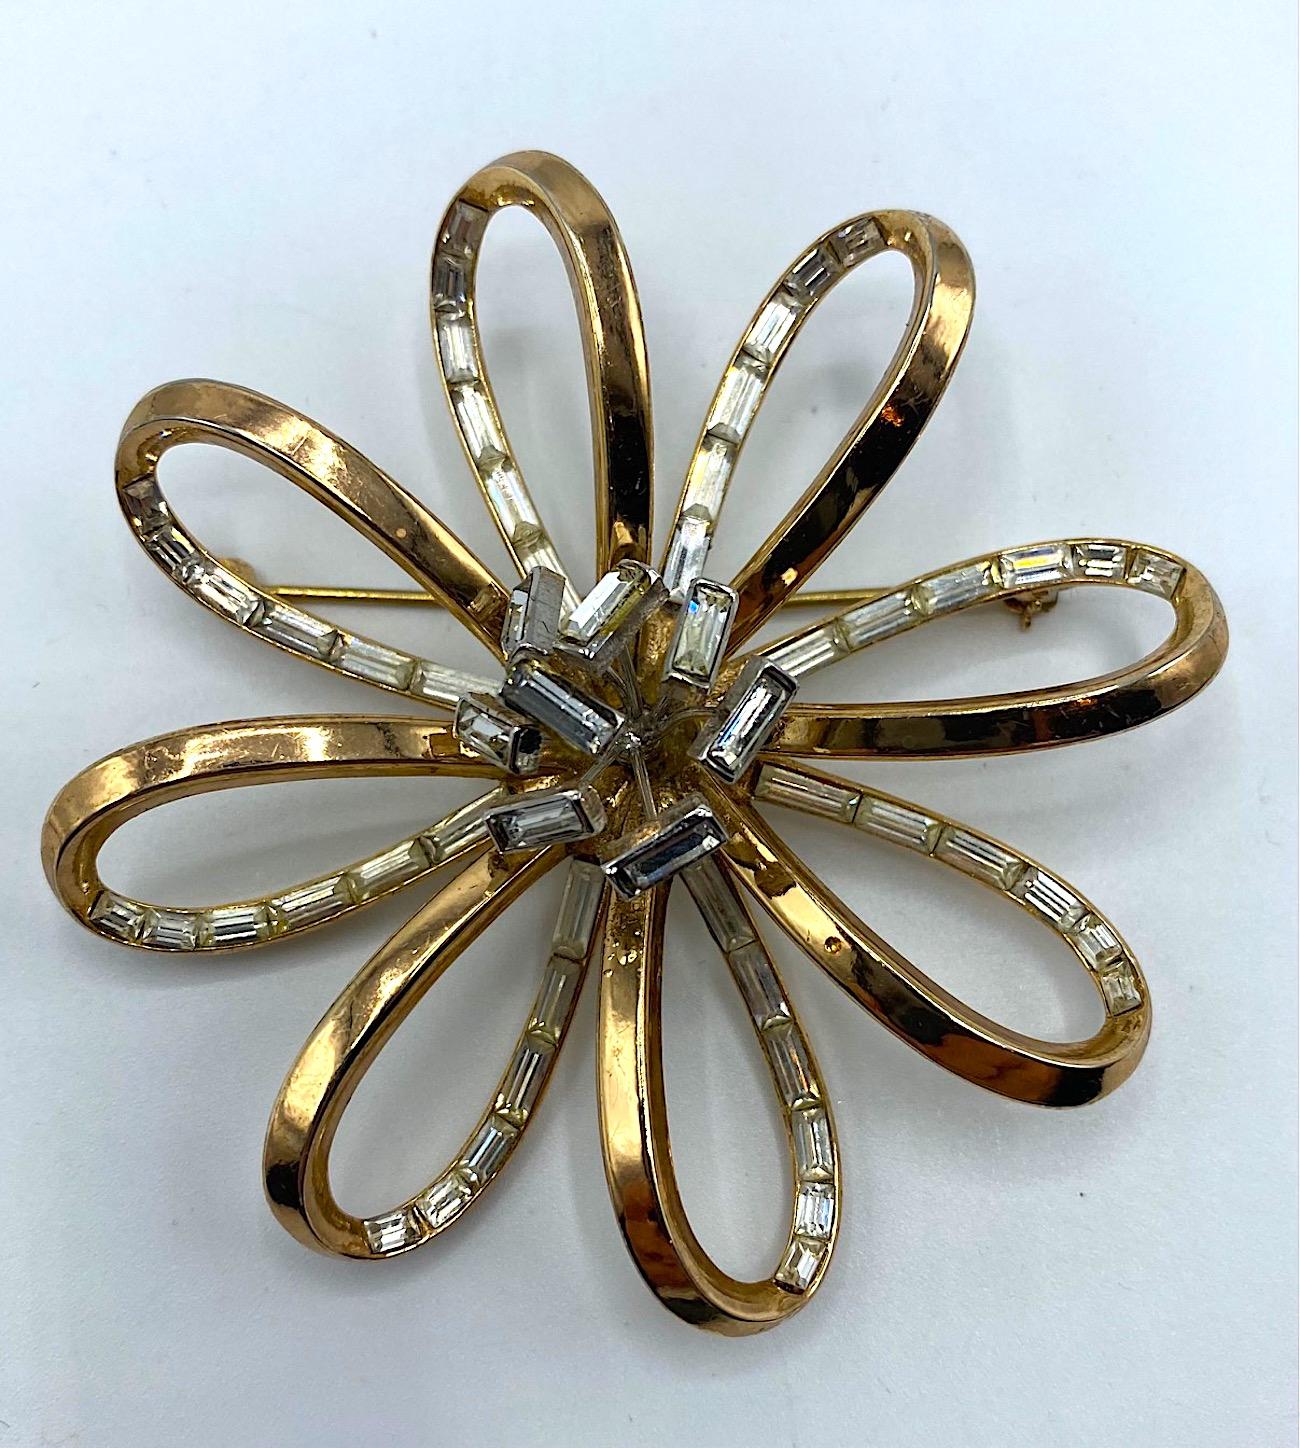 A wonderful and three dimensional 1940s flower brooch by renowned American costume jewelry company Trifari. Each of the flower petals is designed as an open loop shape. The rhinestone baguettes are set on the inside back of the petal. The solid gold